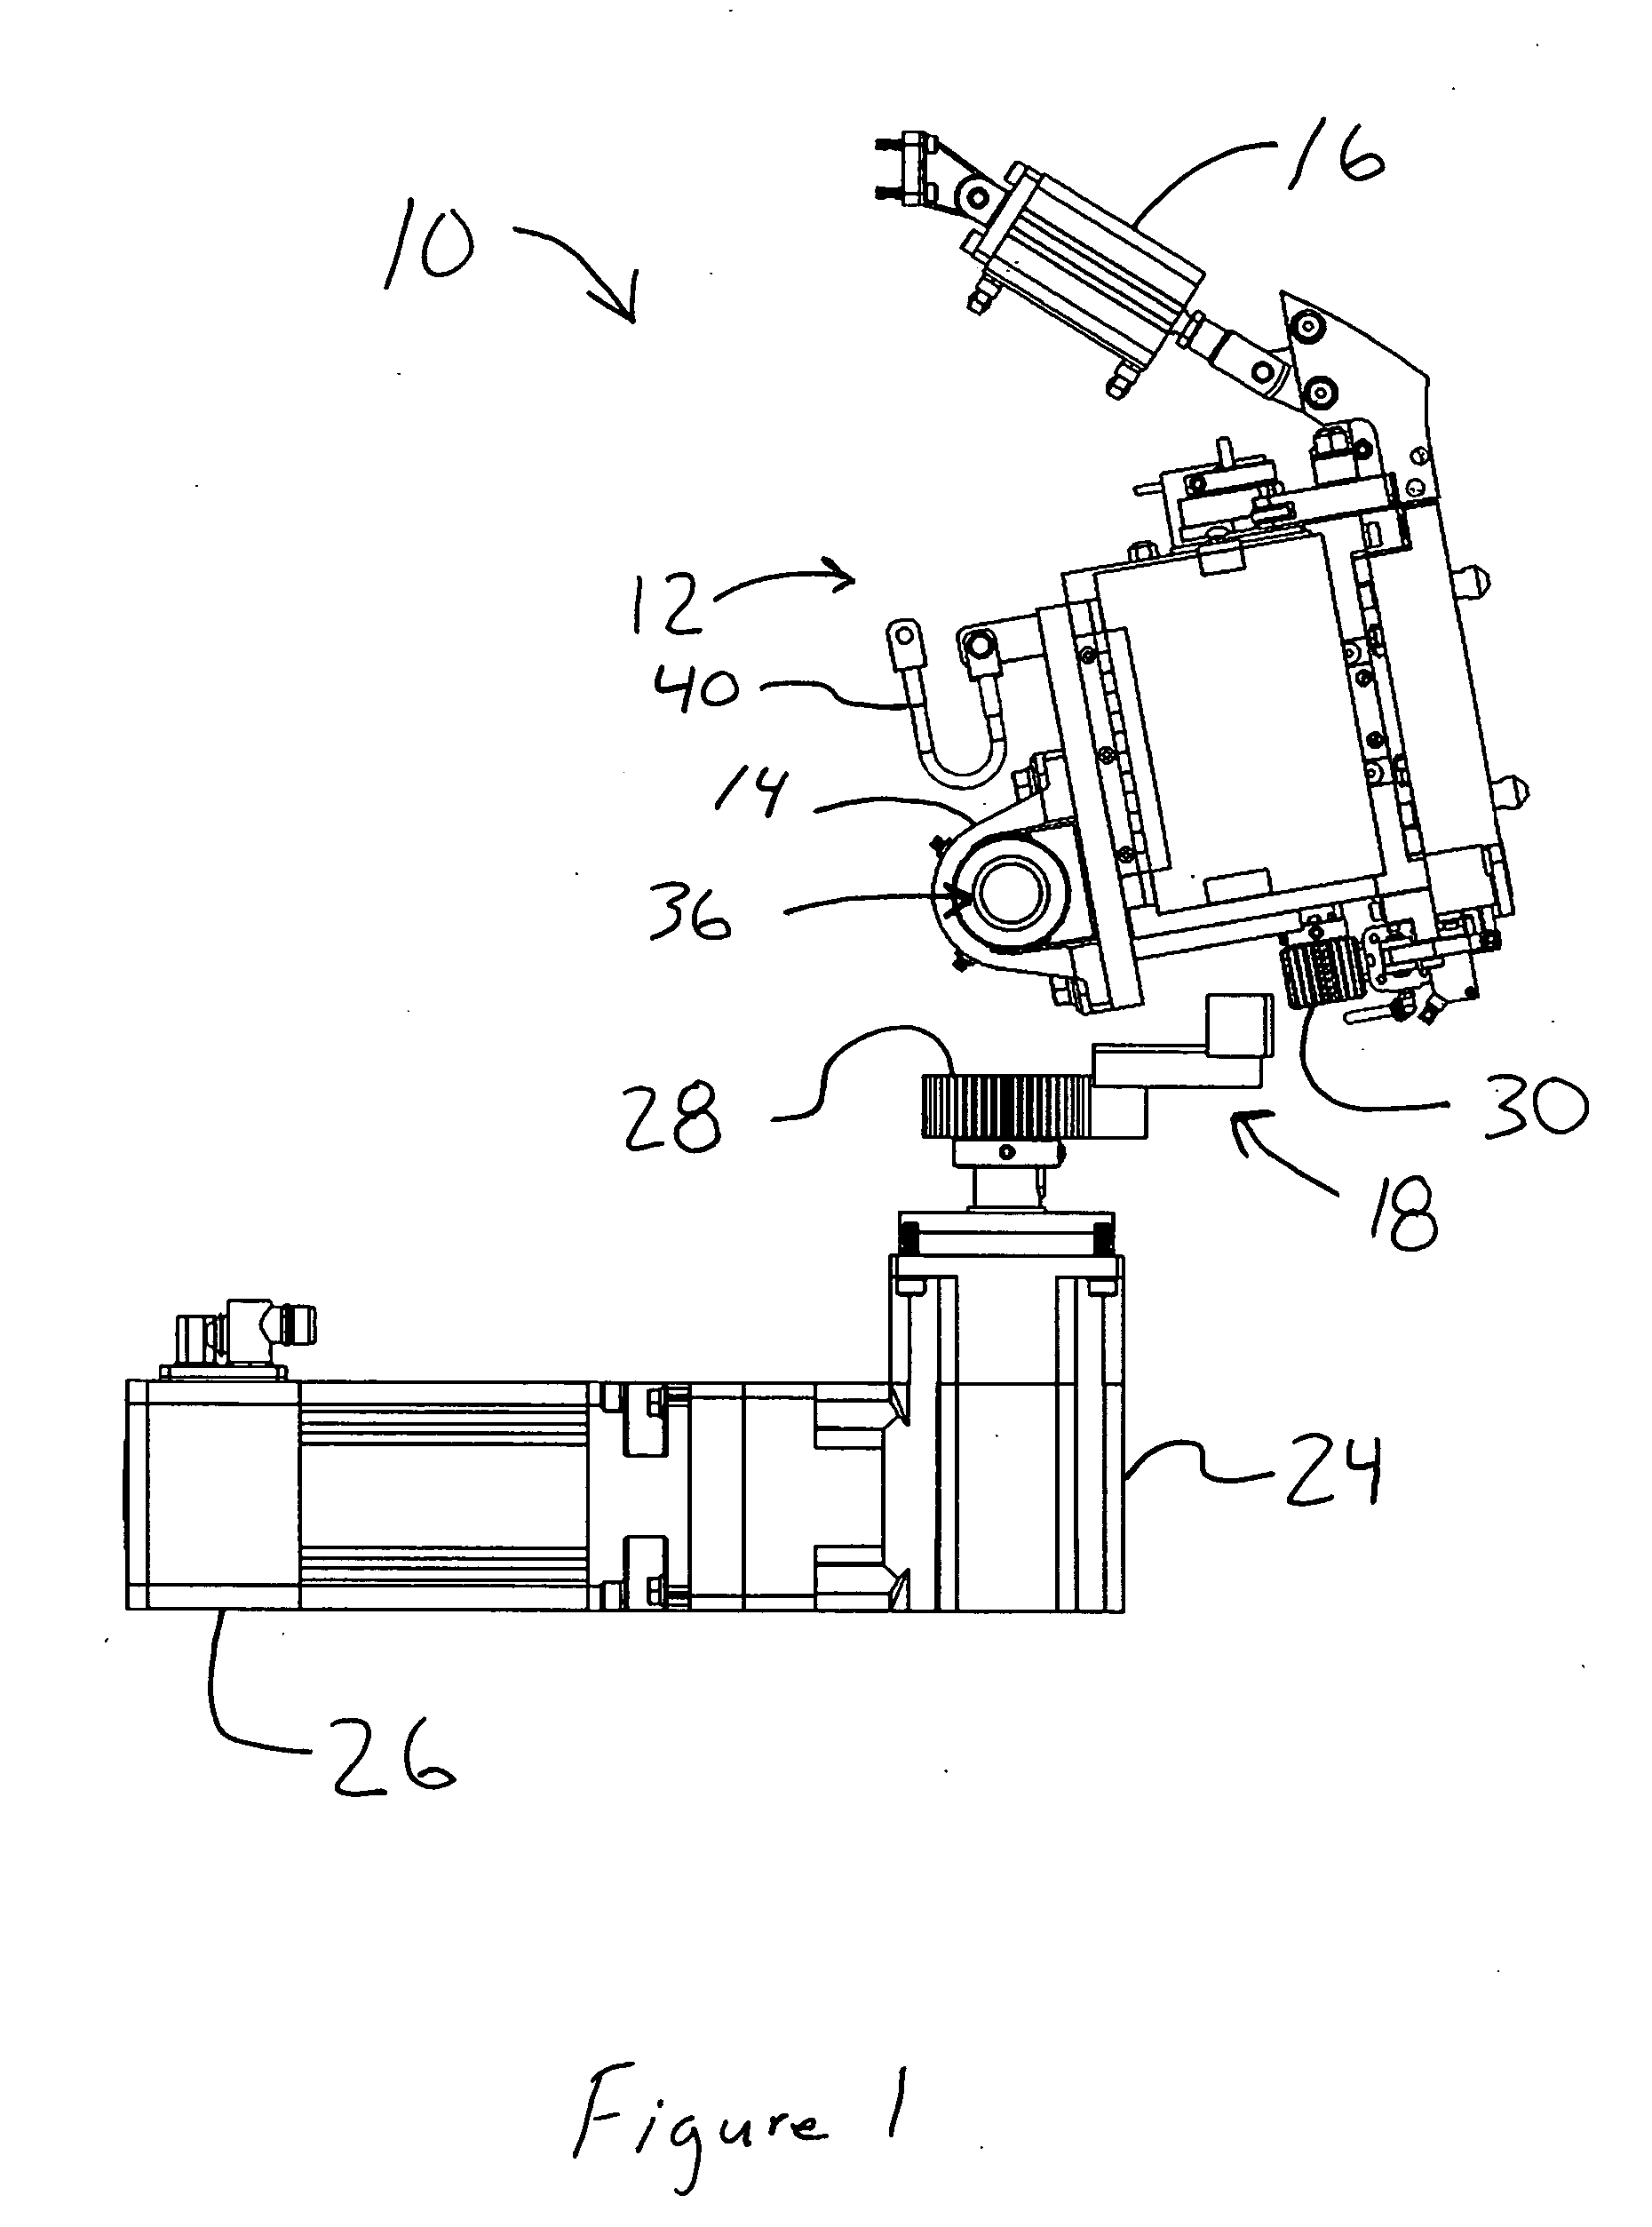 Method and apparatus for driving multiple knotters